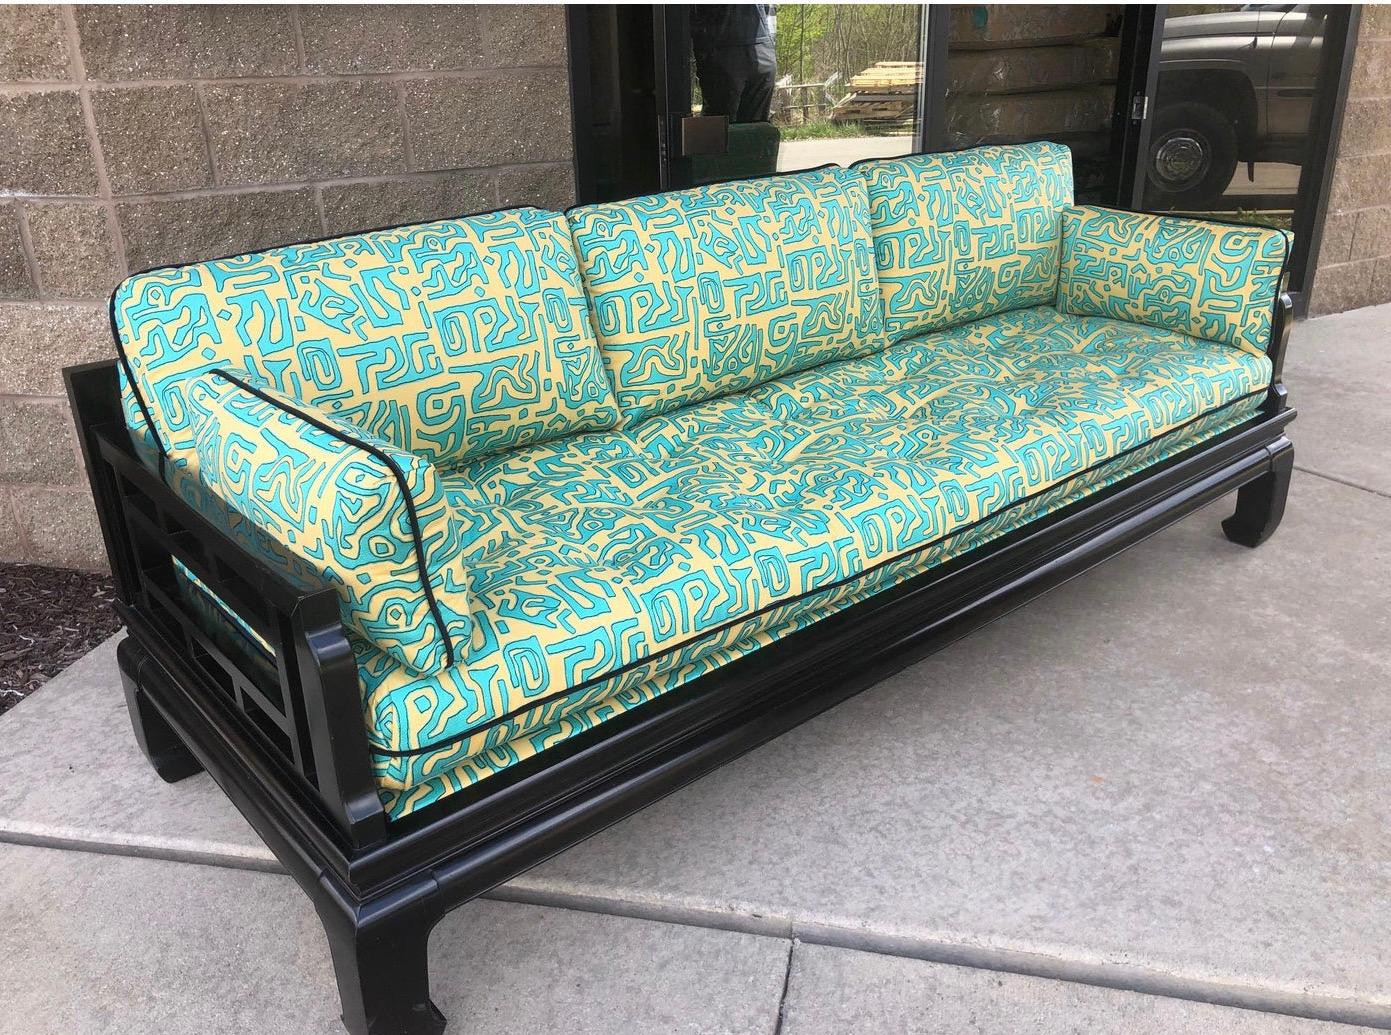 Spectacular Century Furniture Made Tomei Sofa, part of the highly sought after Chin Hua collection by Raymond Sobota, circa 1970s. Fresh from a complete overhaul from the Upholstery house and covered in a decadent imported Italian Woven by Robert